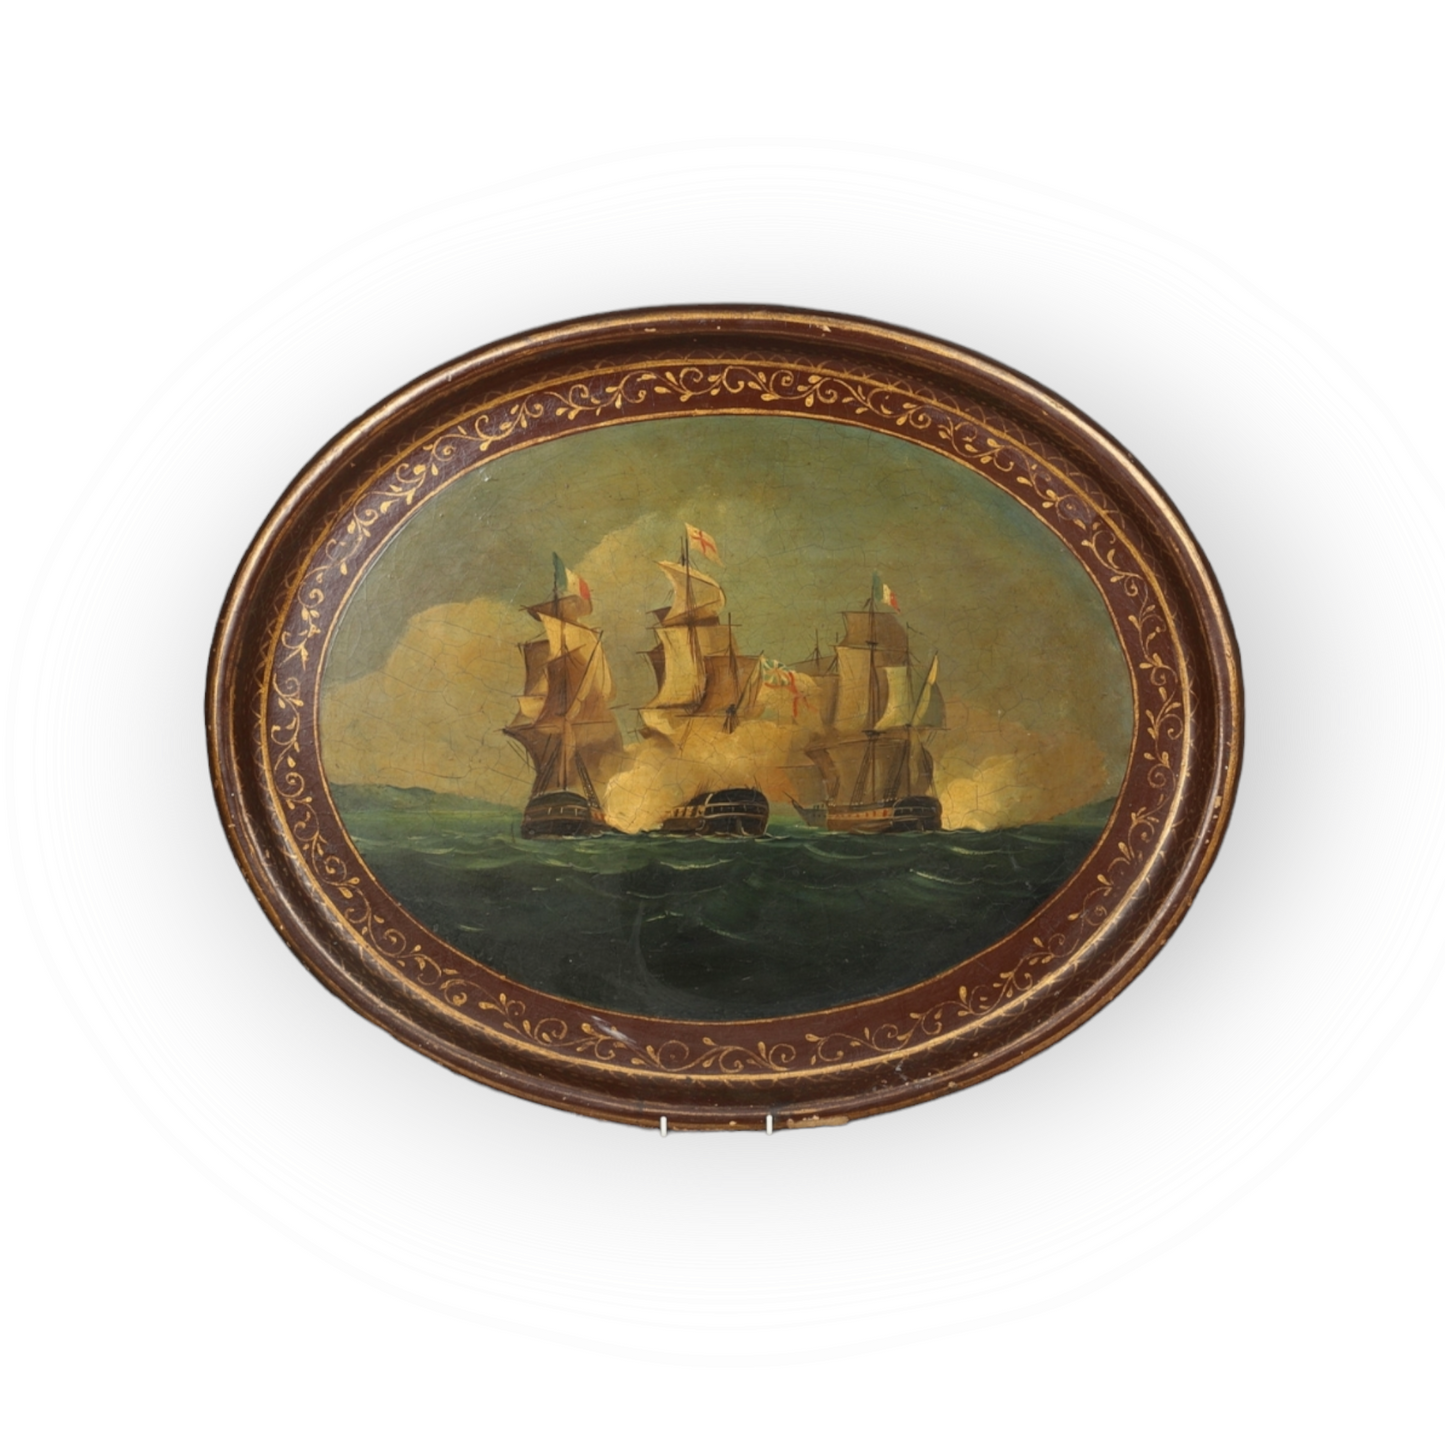 A Large 19th Century English Antique Oval Papier-Mache Tray With A Hand-Painted Scene Of An English Naval Battle